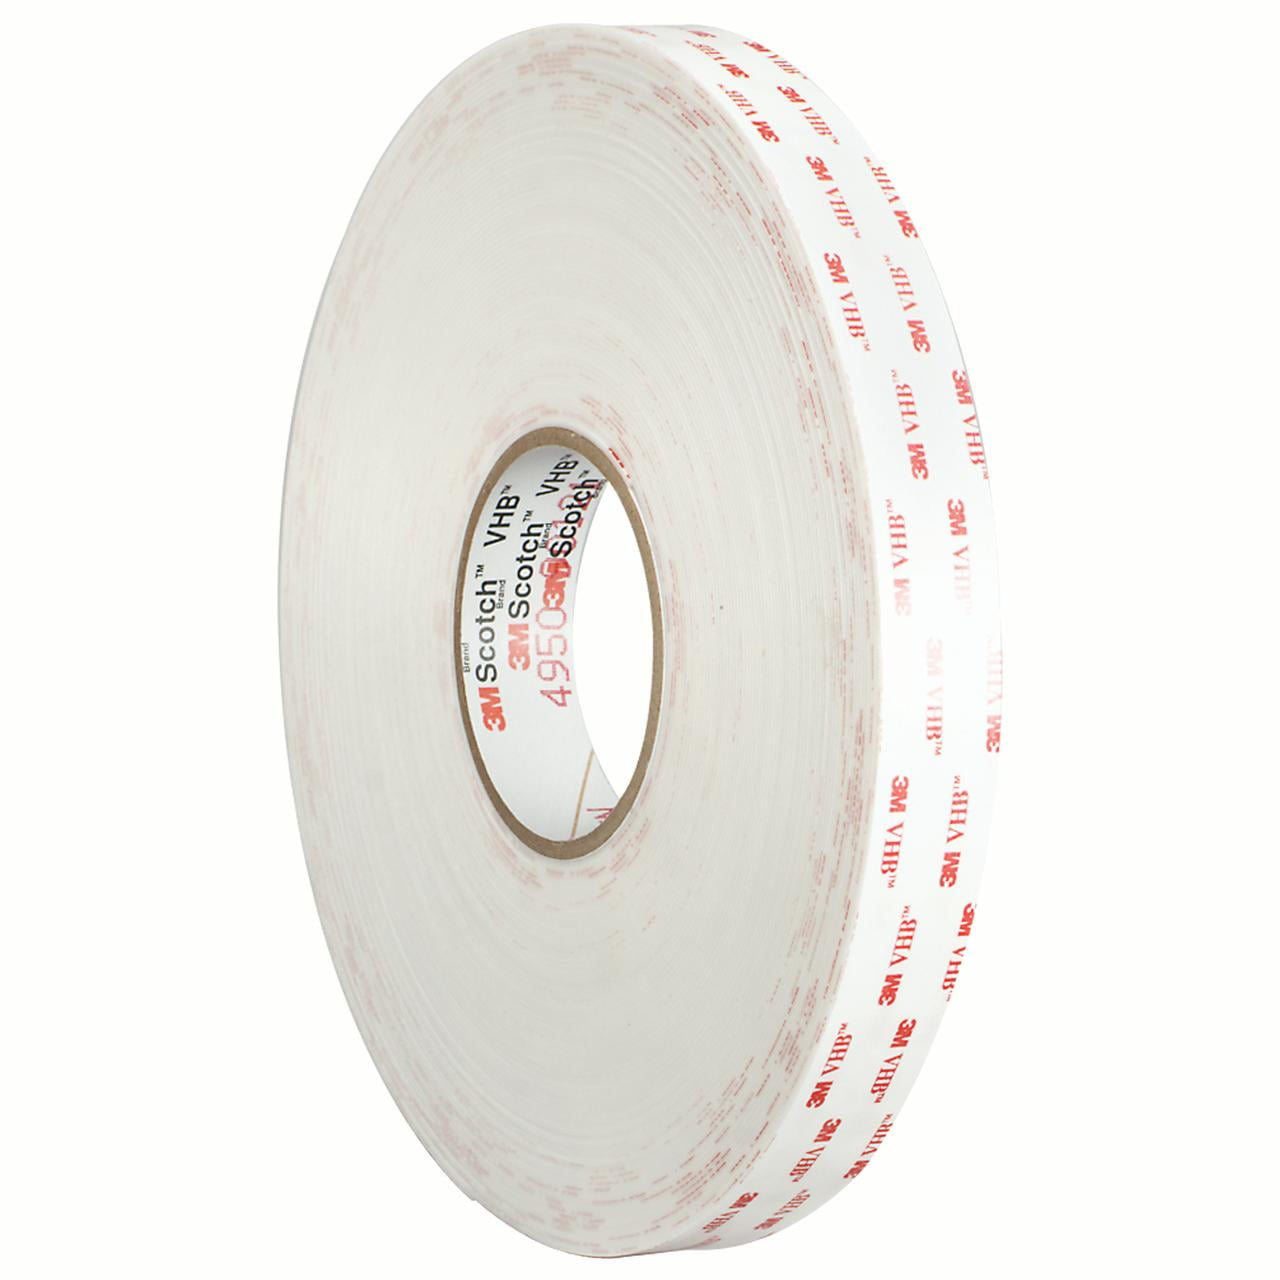 493001r 1 In. X 5 Yards White 3m 4930 Tape